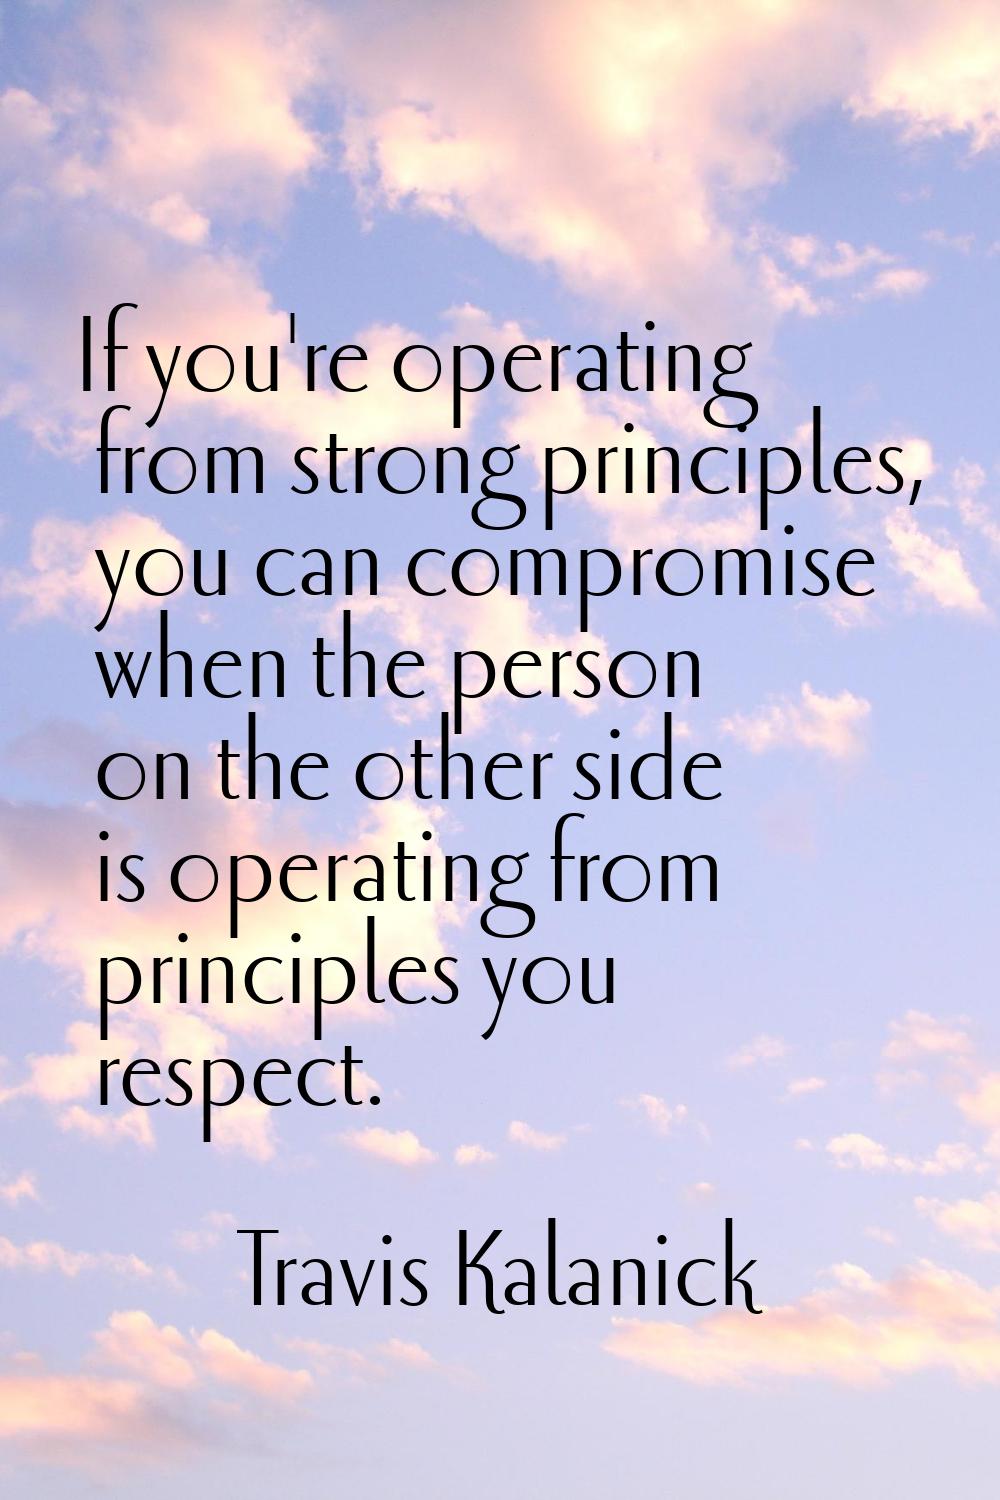 If you're operating from strong principles, you can compromise when the person on the other side is